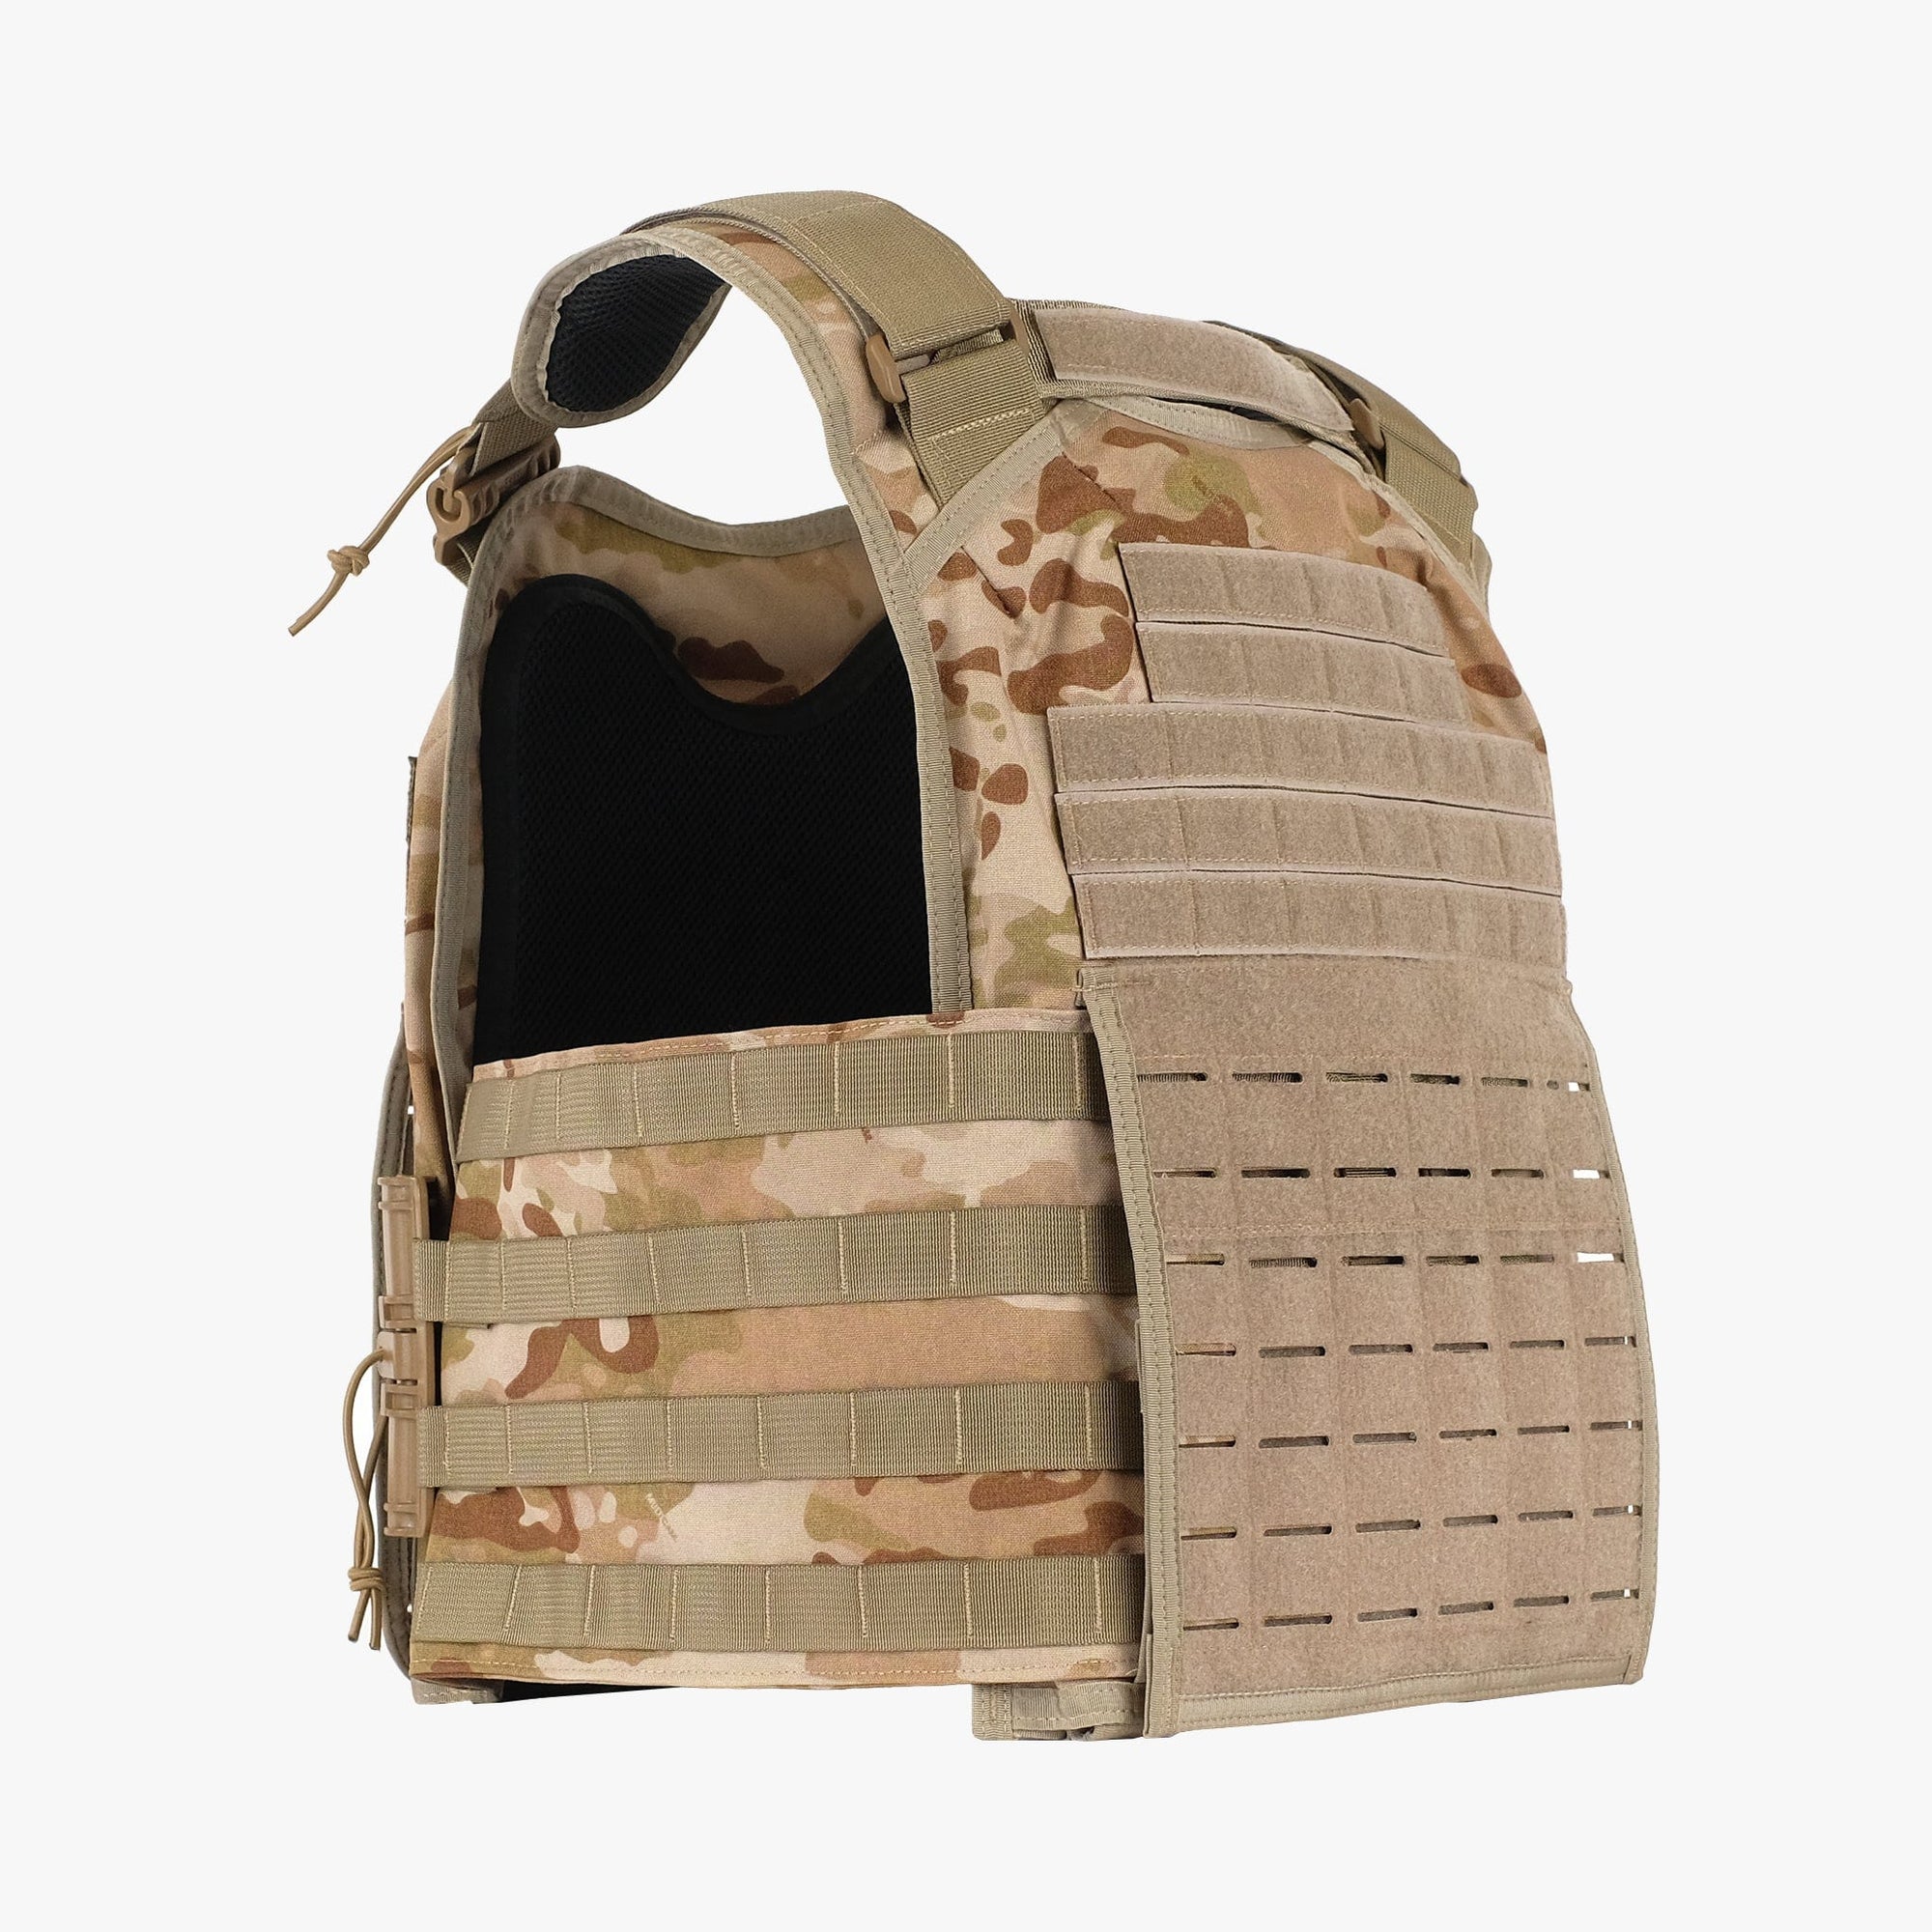 The best plate carrier vest for all your needs. This tactical bulletproof vest can be enhanced with level 3 or level 4 rifle rated plates. The best plate carrier vest includes level 3a side ballistic panels. 